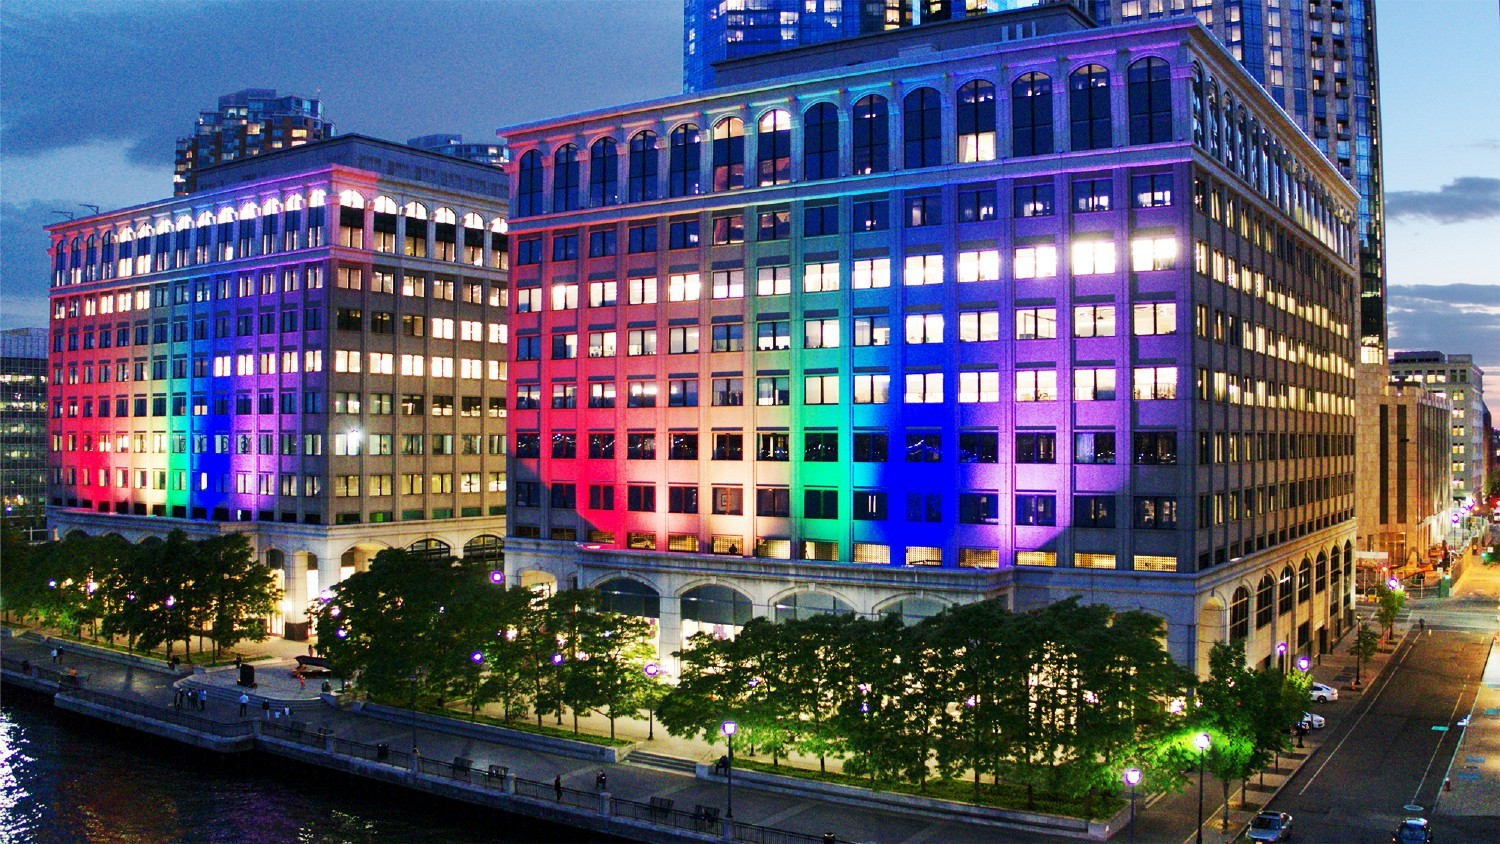 Lord Abbett illuminates our HQ building in rainbow flag colors in June signifying allyship for the LGBTQ+ community.